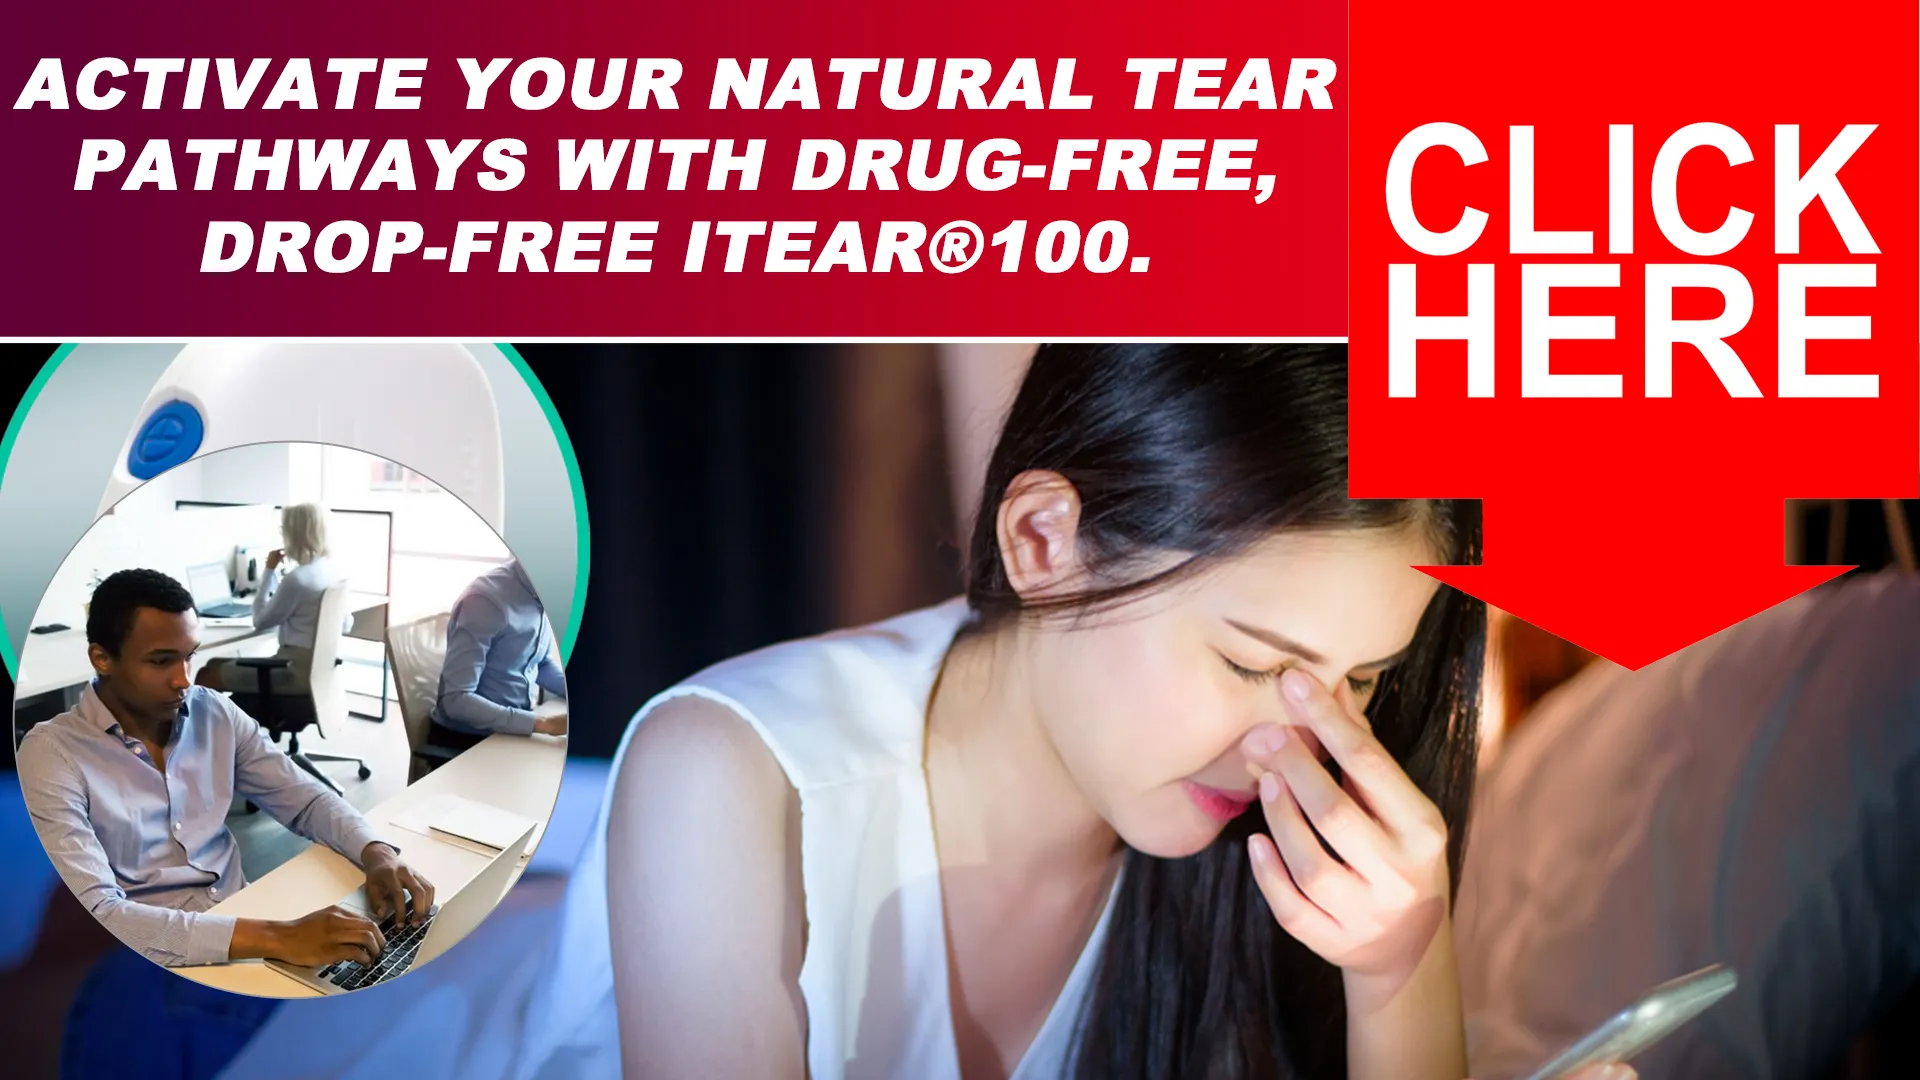 The iTEAR100: The Future of Dry Eye Relief